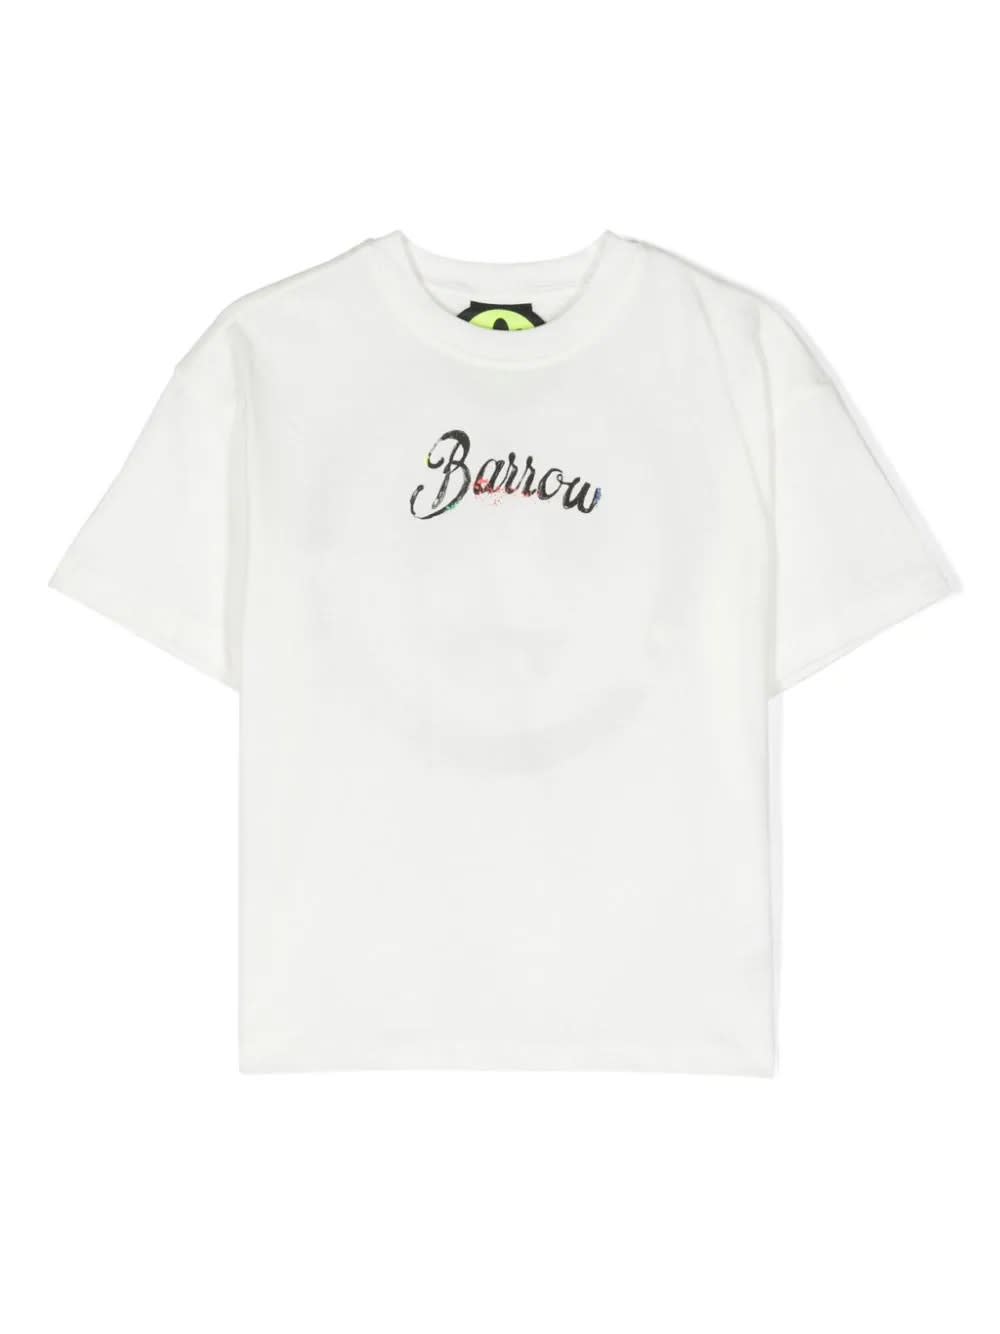 Barrow Kids' White T-shirt With Lettering Logo